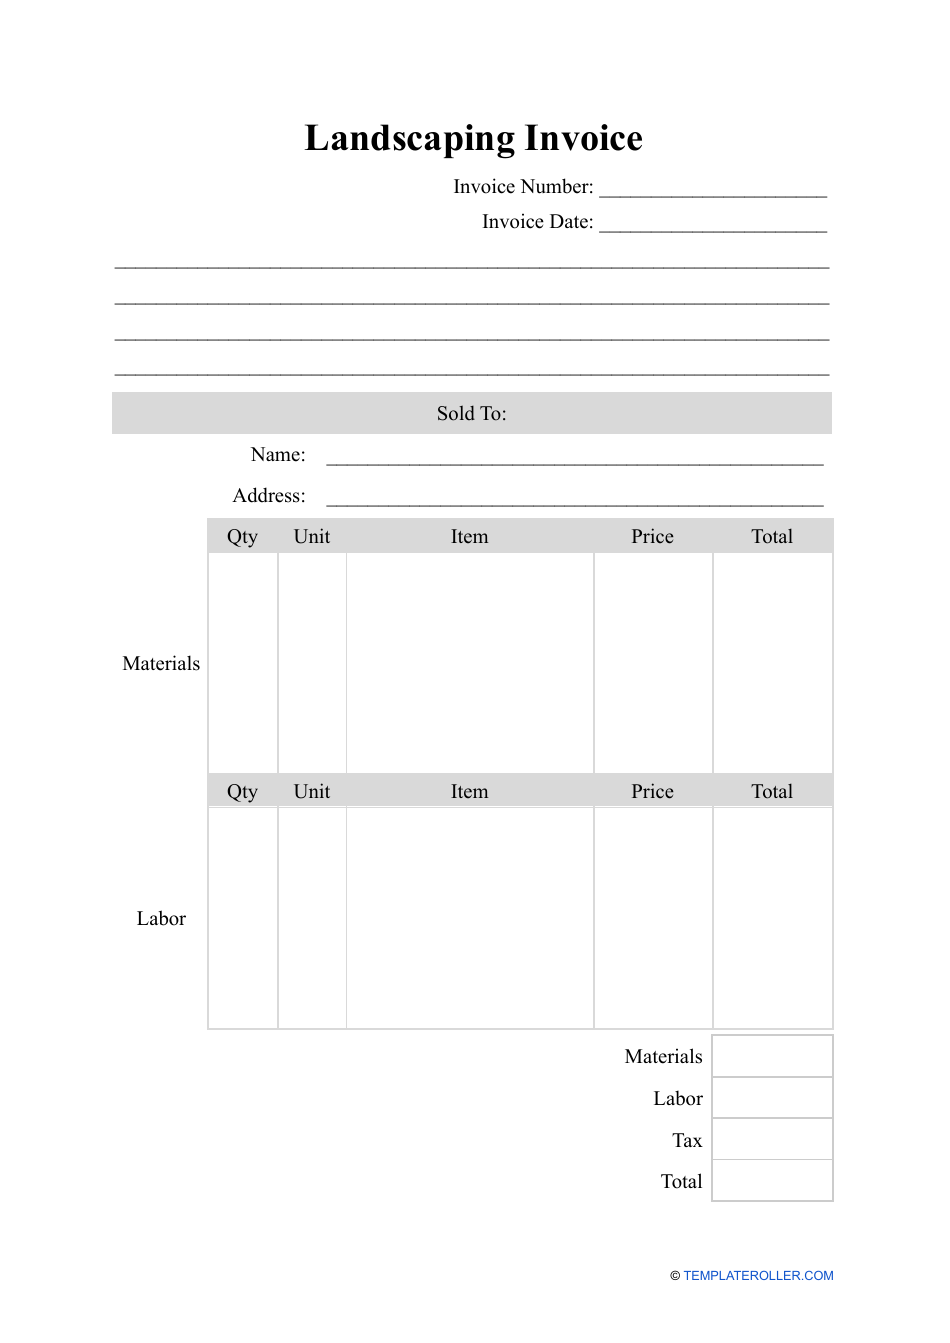 landscaping invoice template download printable pdf templateroller